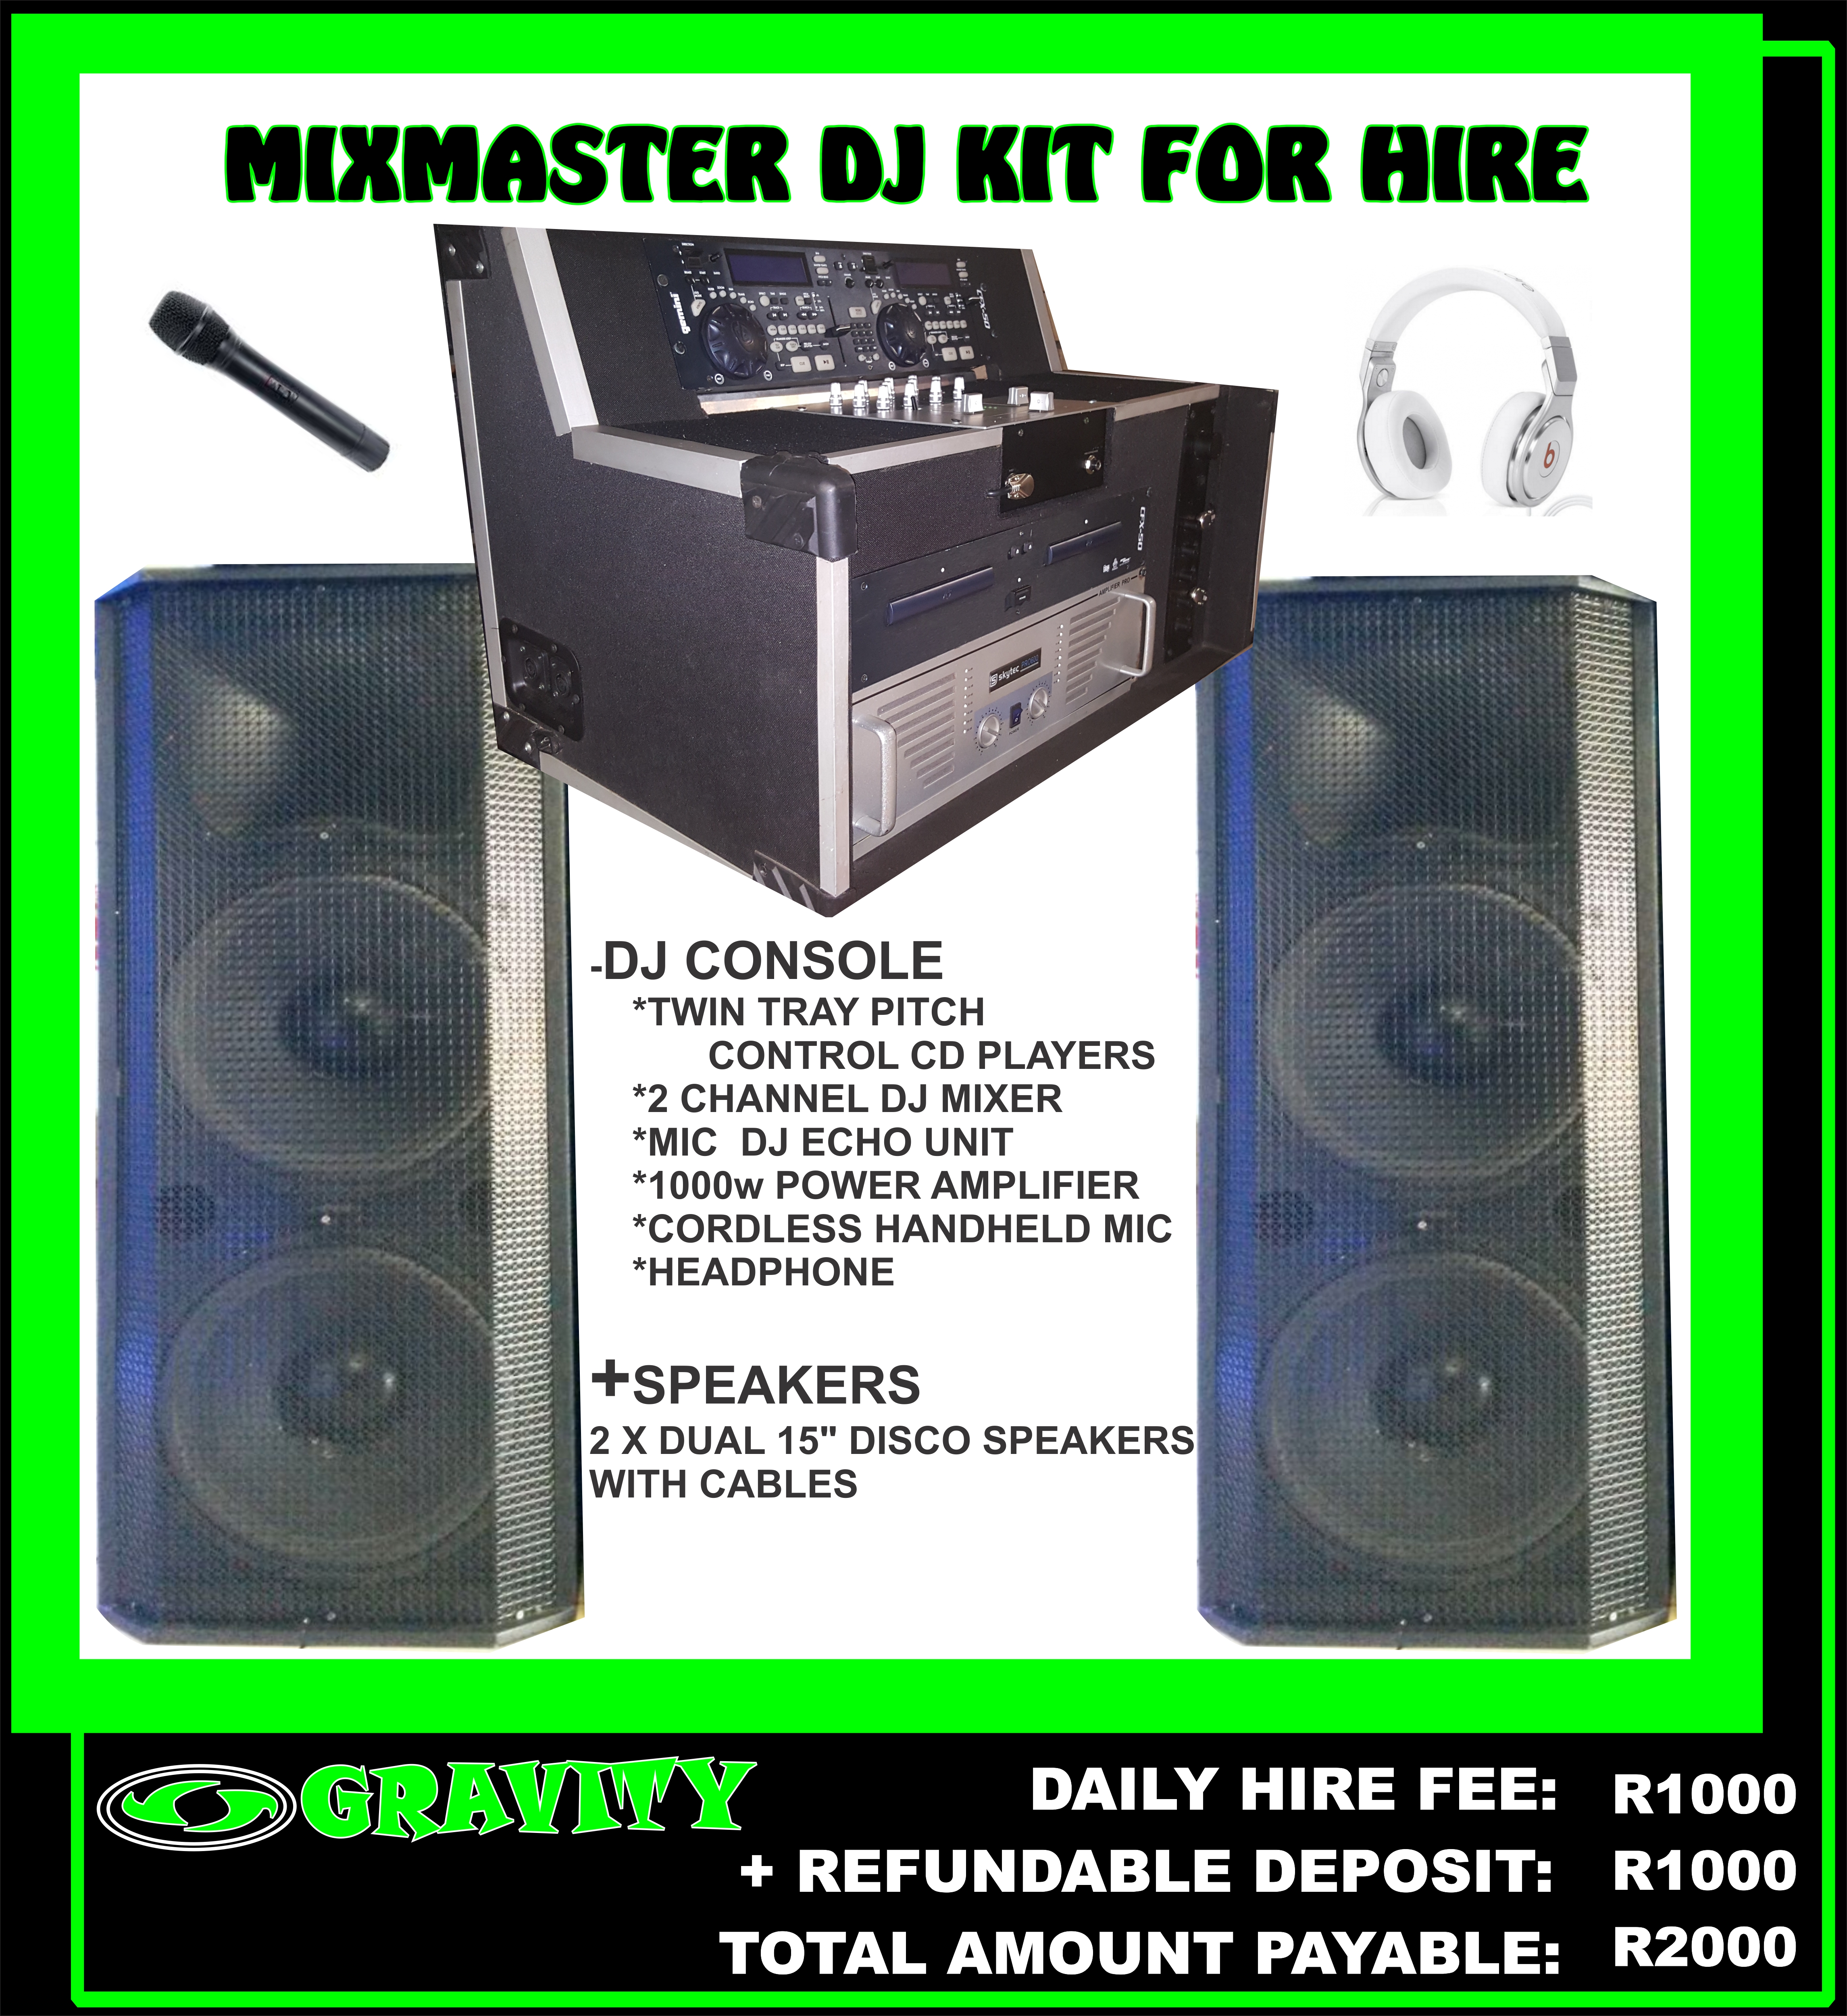 MIXMASTER DJ ENTERTAINMENT MIXING CONSOLE  -DUAL GEMINI TWIN TRAY CD PITCH CONTROL PLAYER  -2 CHANNEL DJ MIXER  -DJ MIC ECHO UNIT  -1000w POWER AMPLIFIER  -COMPLETE IN A DJ CONSOLE..PLUG & PLAY  includes : wireless mic and Dj headphone  + DUAL 15